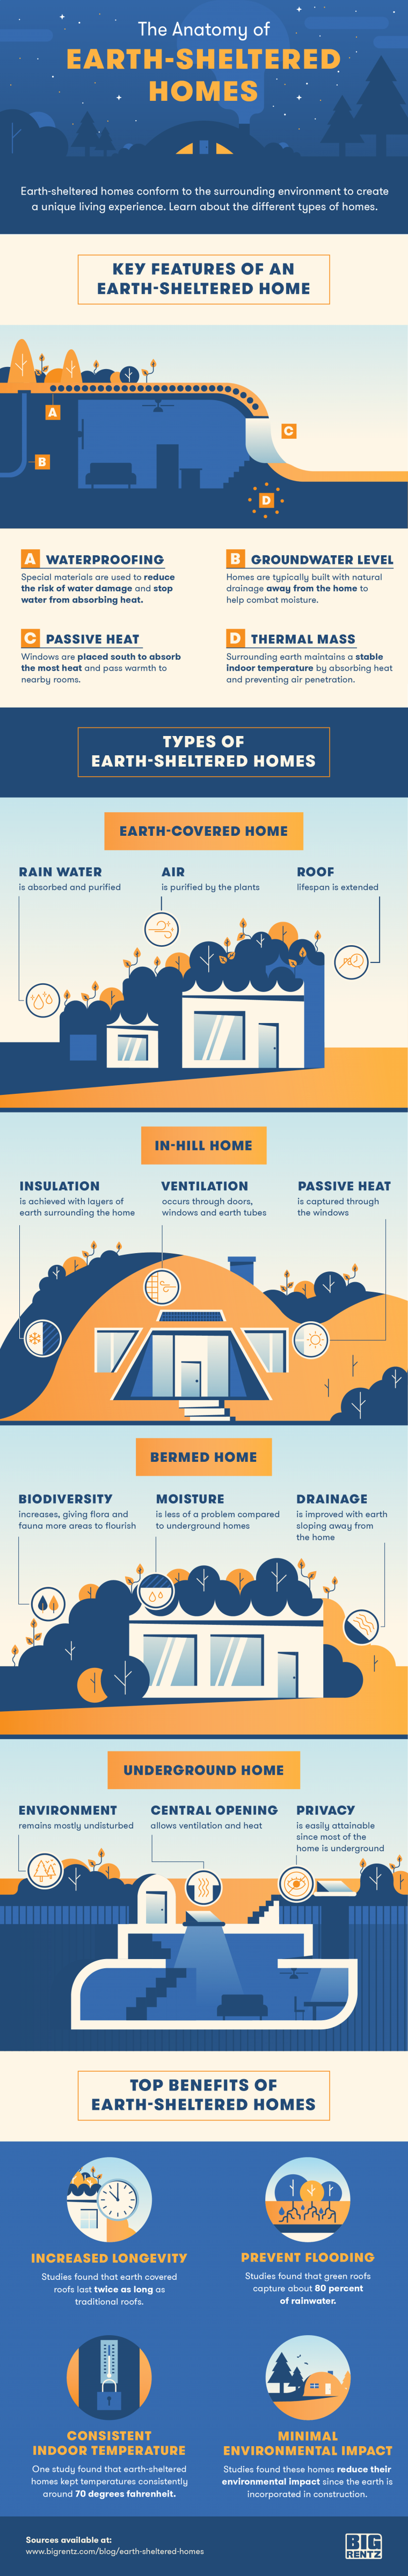 The Anatomy of Earth-Sheltered Homes [Visual] | ecogreenlove